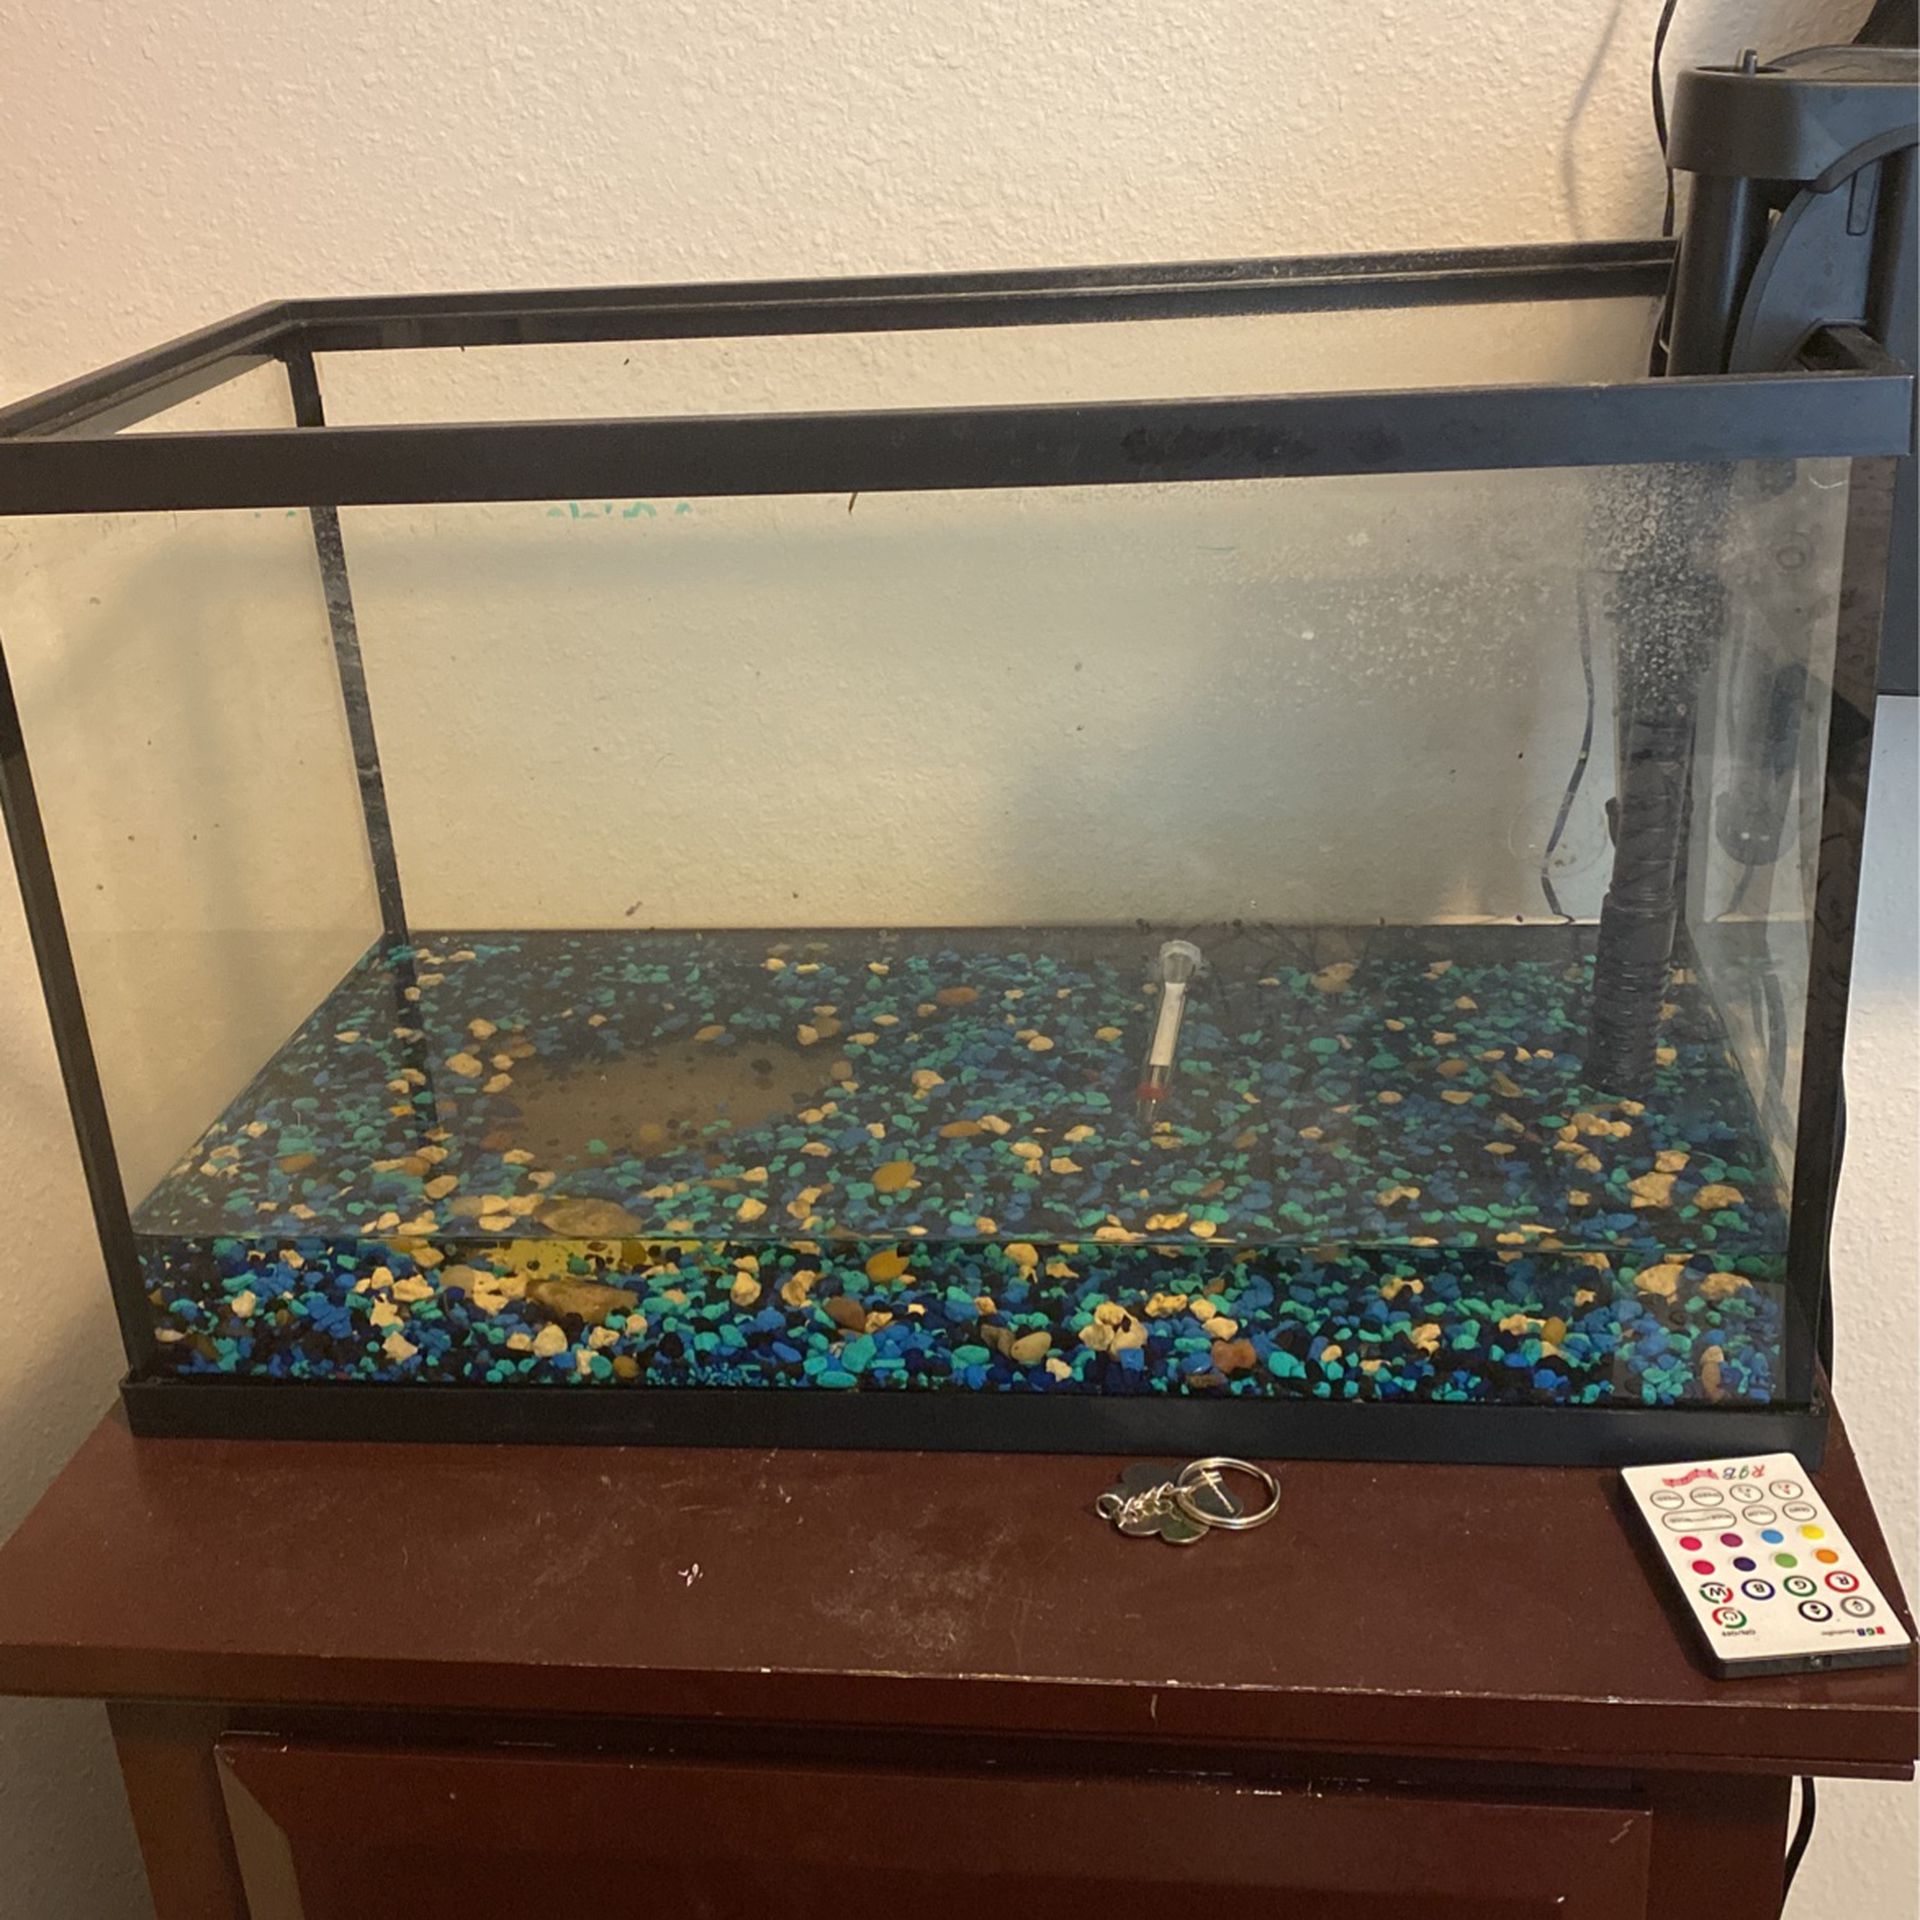 10 Gallon Aquariam With Filter, Heater, And Themometer.